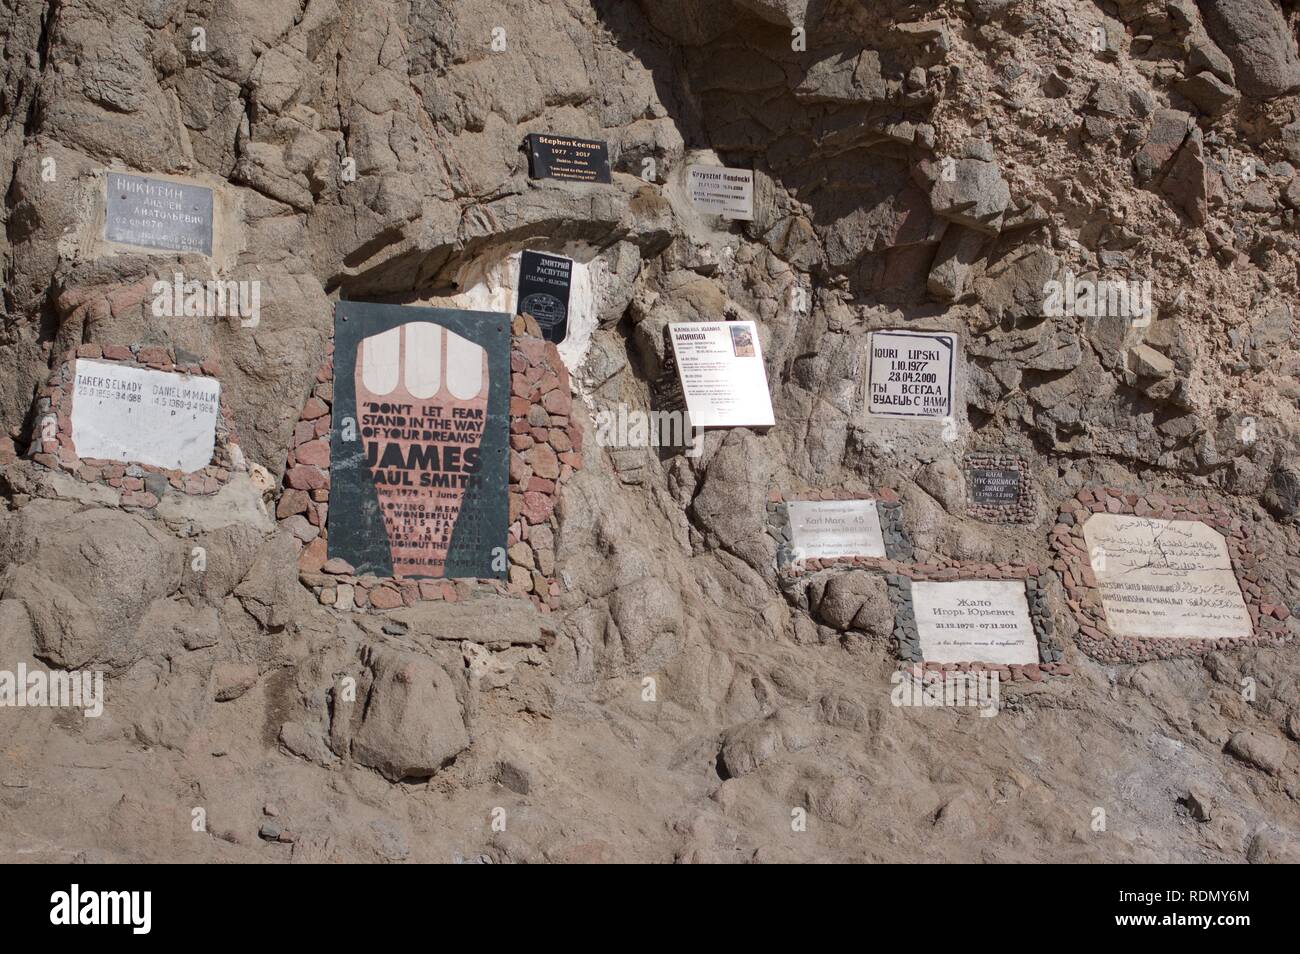 https://c8.alamy.com/comp/RDMY6M/memorial-plaques-to-divers-who-died-at-blue-hole-egypt-RDMY6M.jpg